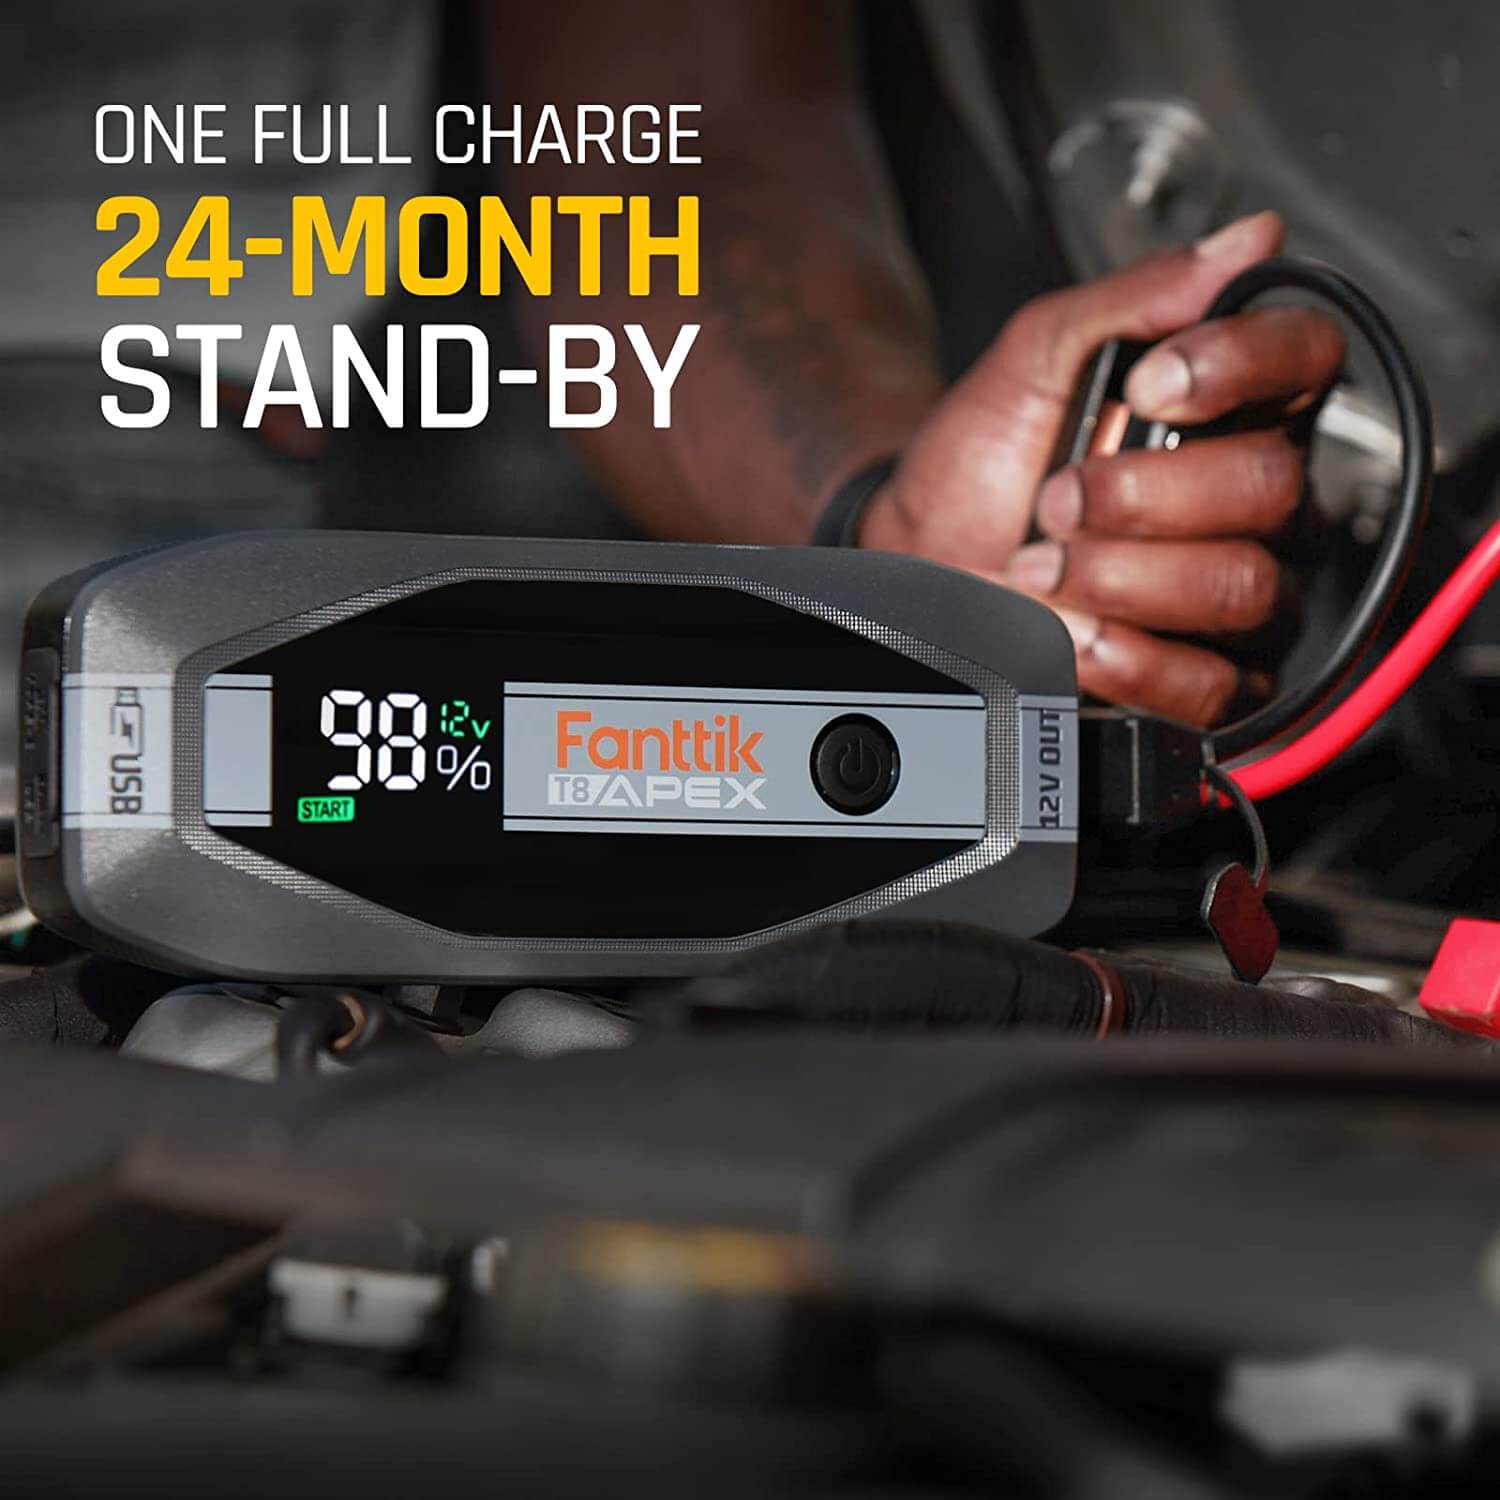 Fanttik T8 APEX 2000 Amp Jump Starter only needs 5-minutes of charge from 0% to a single jump starting for you to hit the road again immediately. 